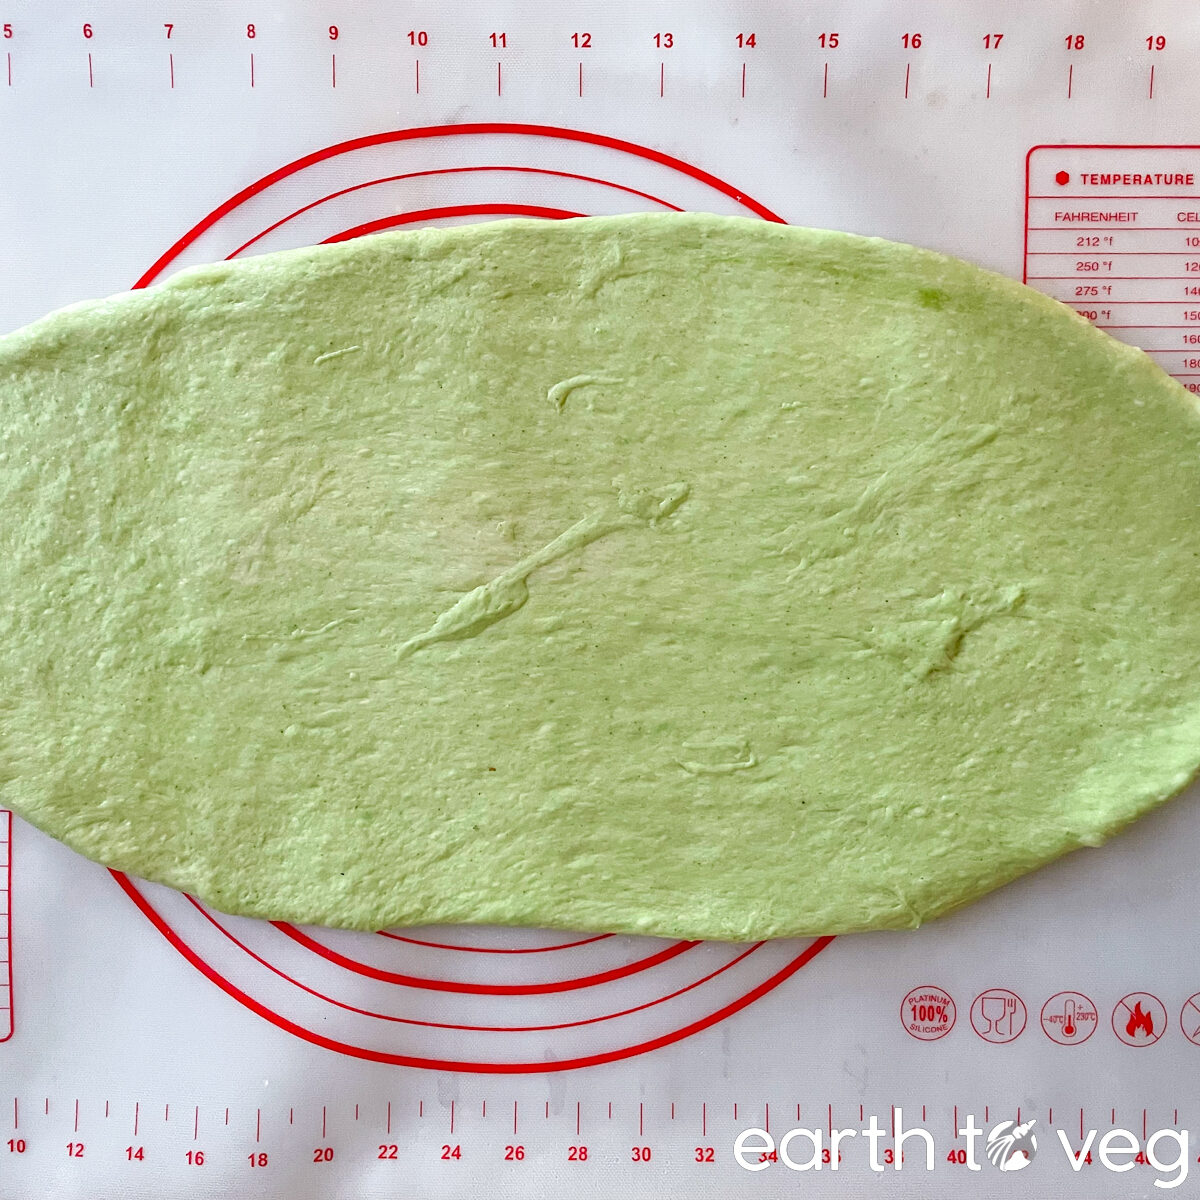 The pandan bread dough is rolled out into a thin sheet on a silicon pastry mat.